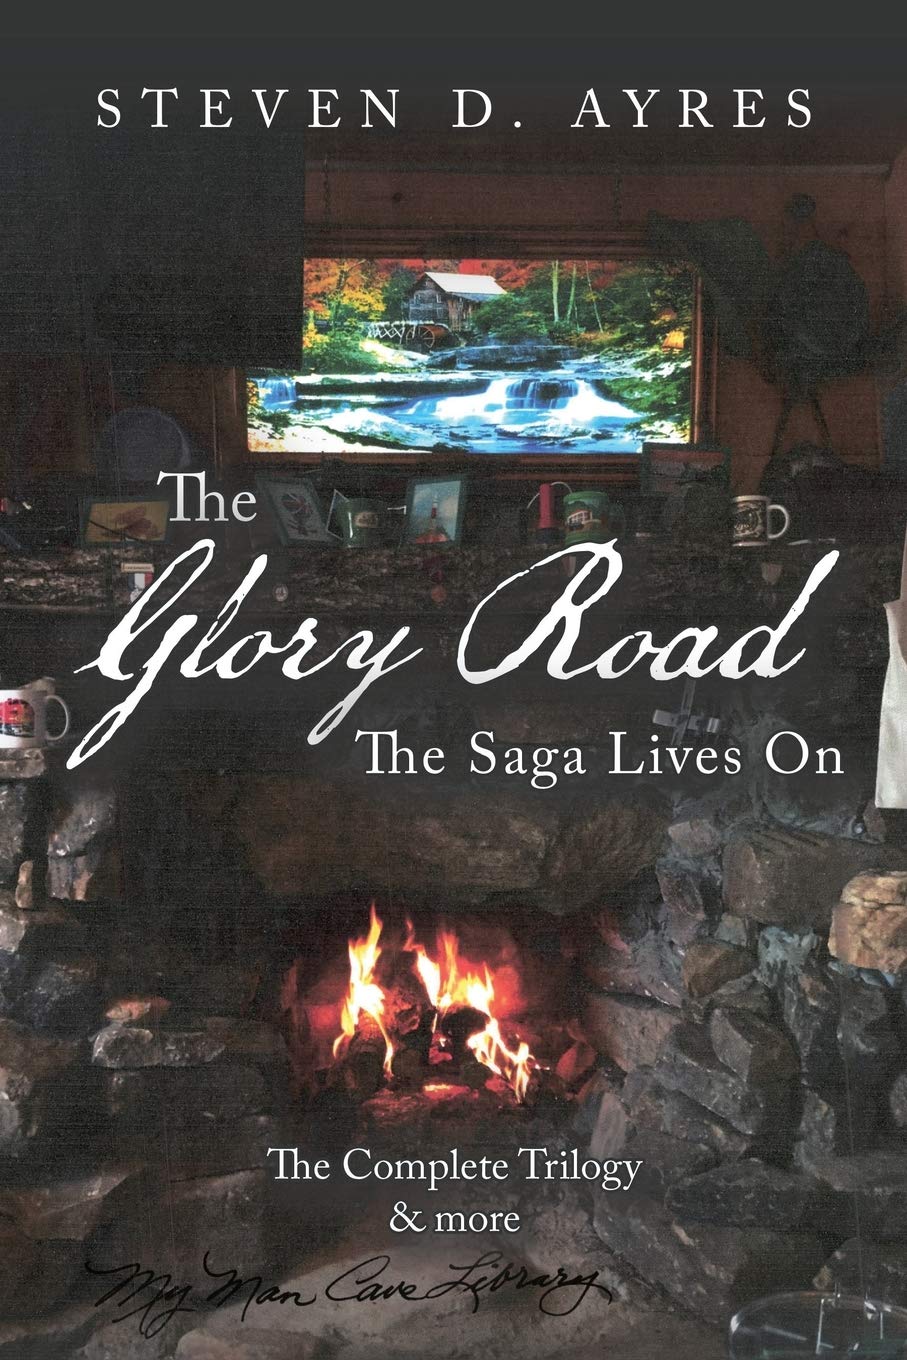 The Glory Road: The Saga Lives On, By Steven D. Ayres, Receives Acclaim for Its Ability to Transport Readers Through Events in the Nation’s History with Authentic Writing and a Focus On Nostalgia